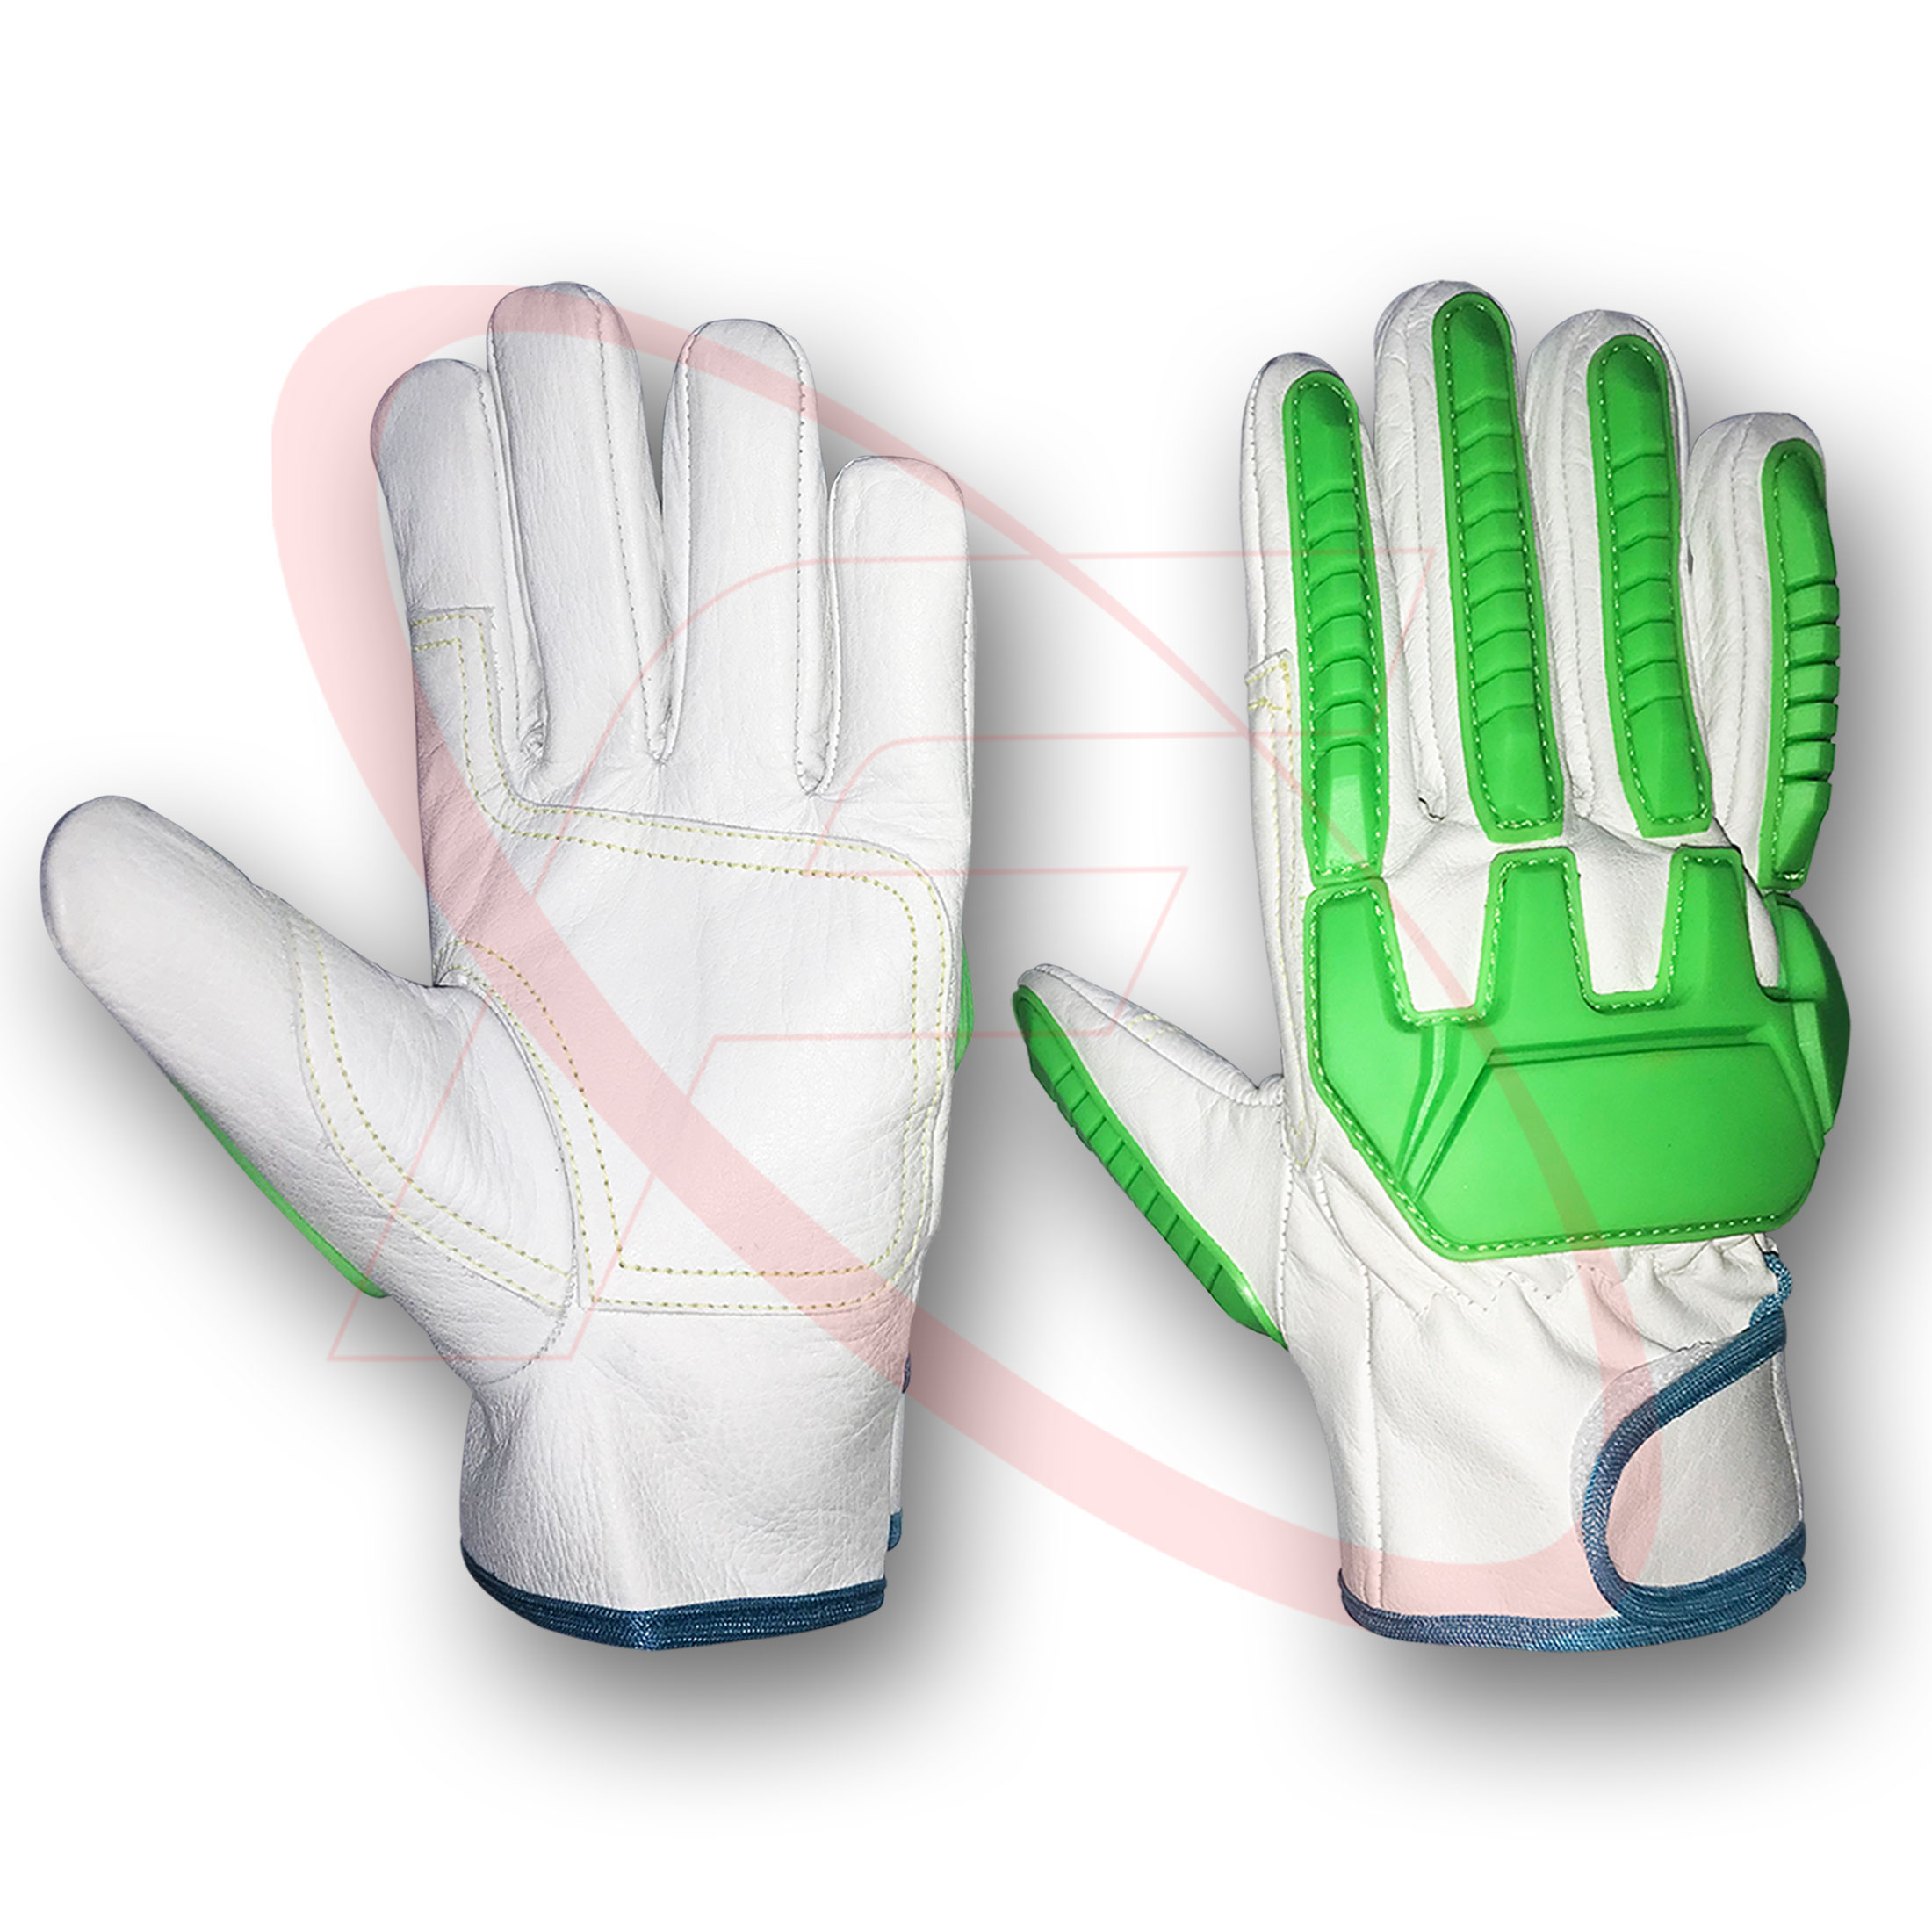 Anti Impact Safety Gloves in Goatskin Leather Best Quality Impact Protective Driving Gloves Best Impact Gloves